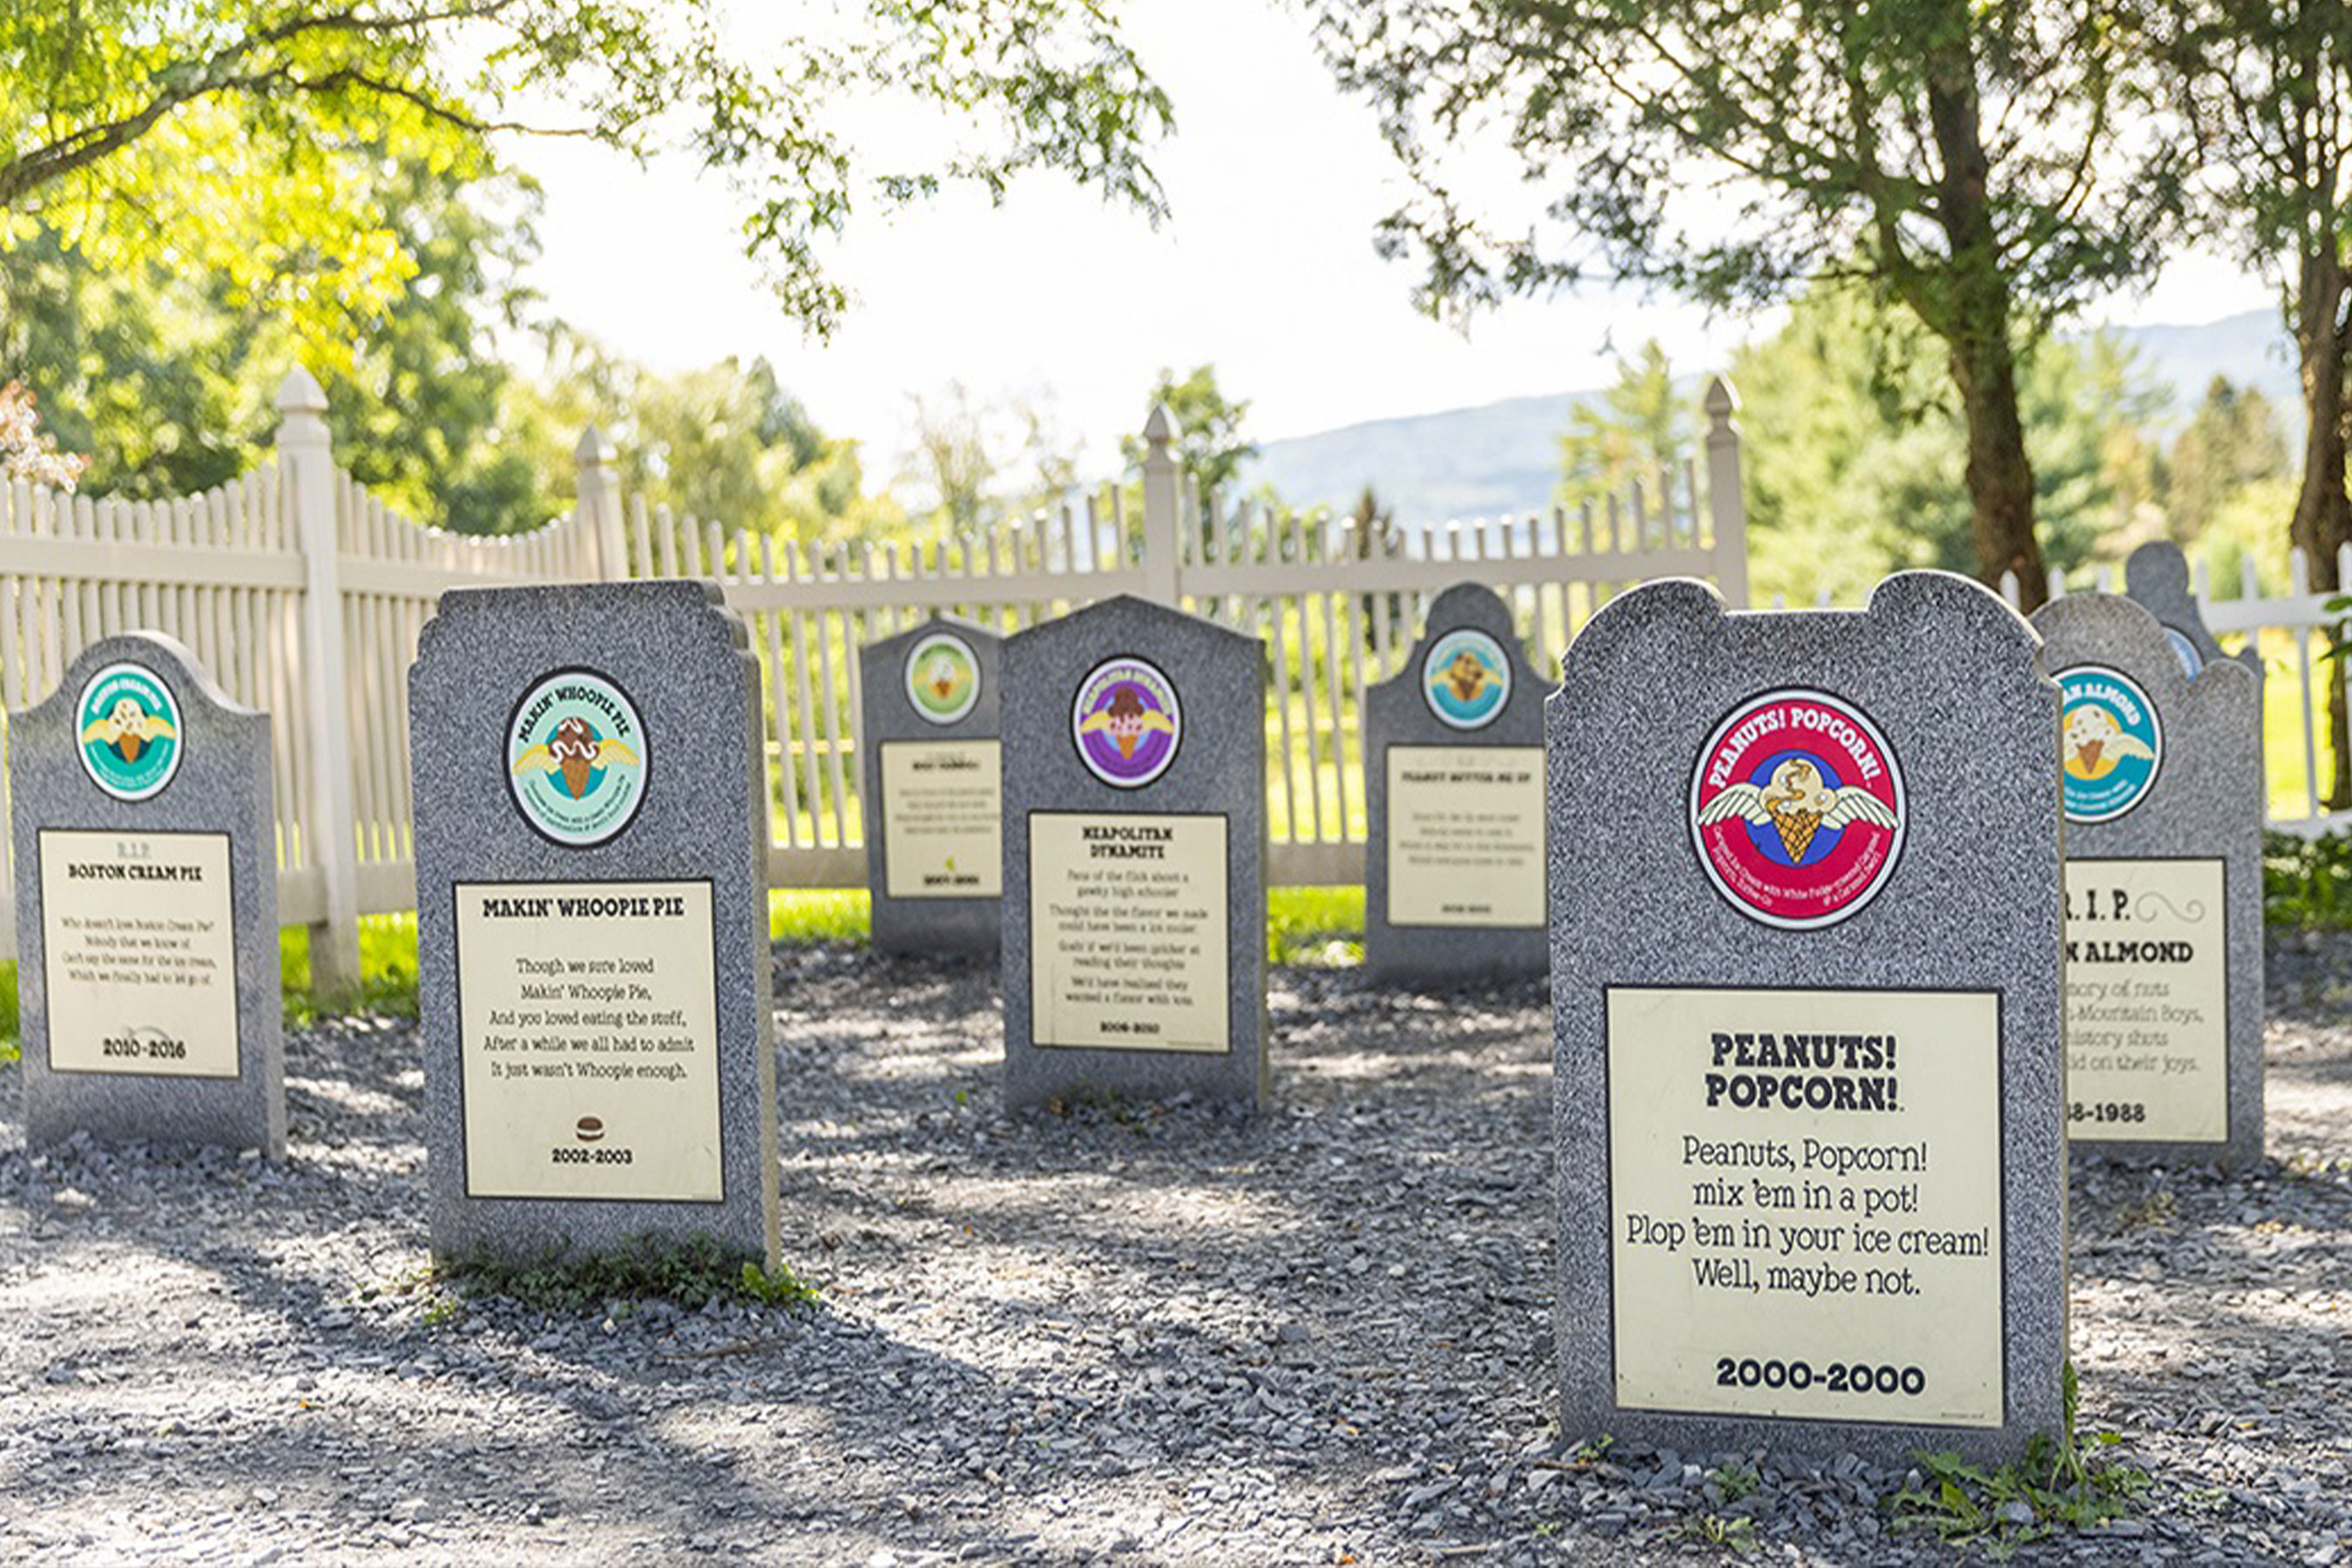 Ben & Jerry’s Flavor Graveyard is one of Vermont’s most popular tourist sites. About 350,000 people visit the dearly “de-pinted” in an average year.